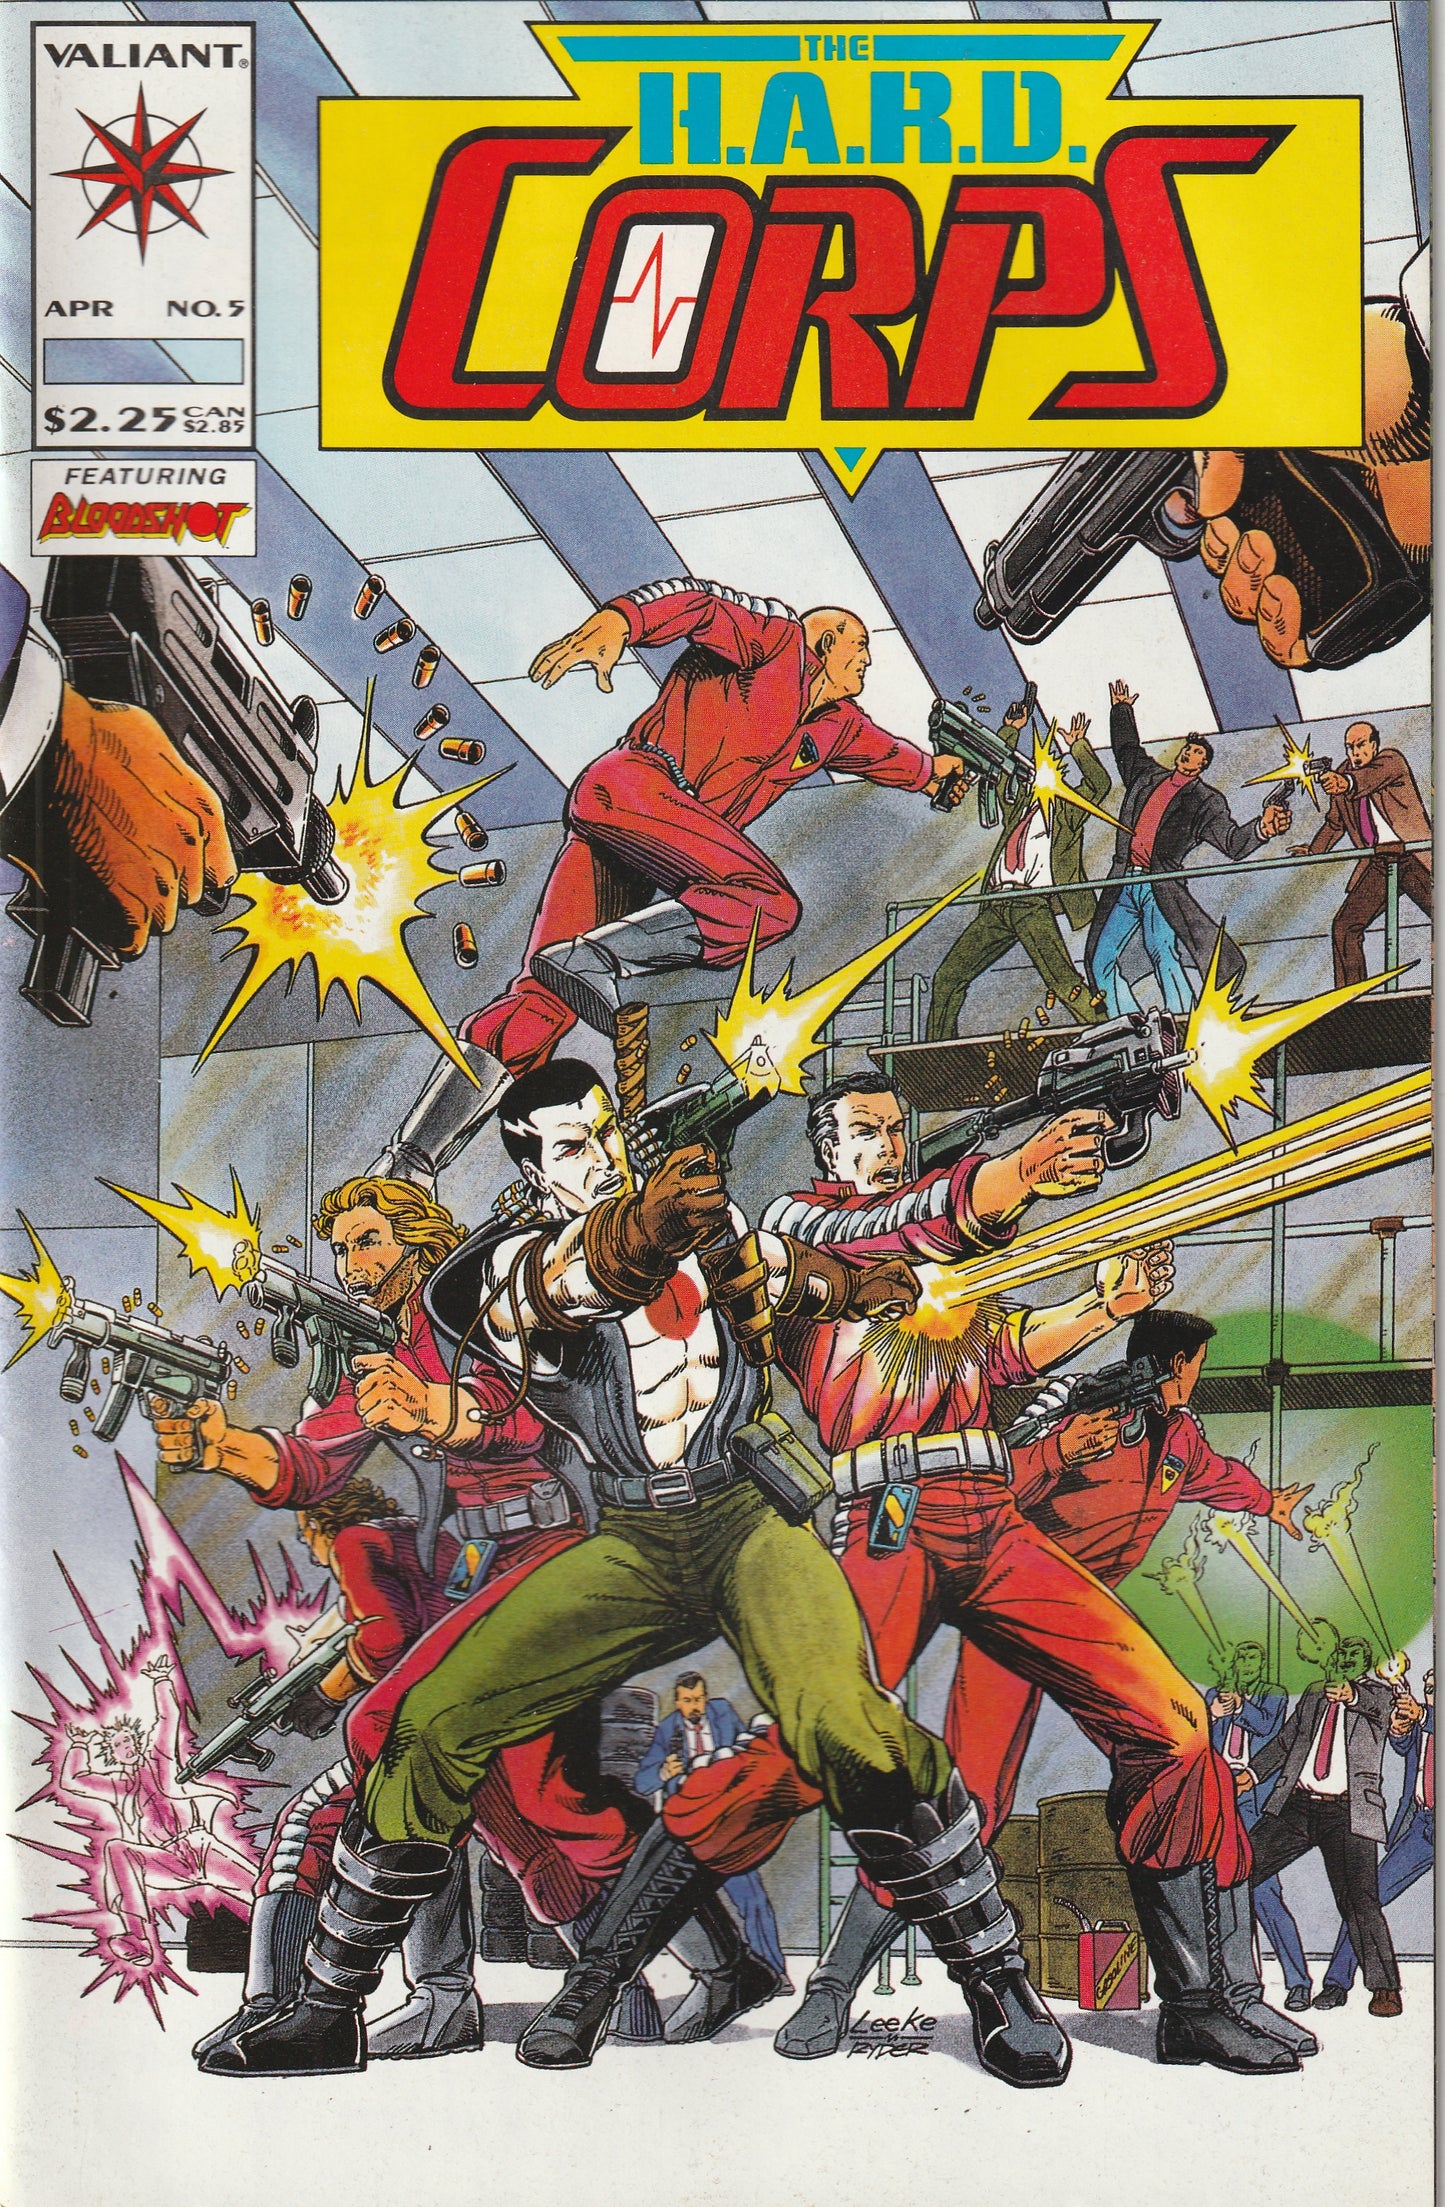 The H.A.R.D. Corps #5 (1993)